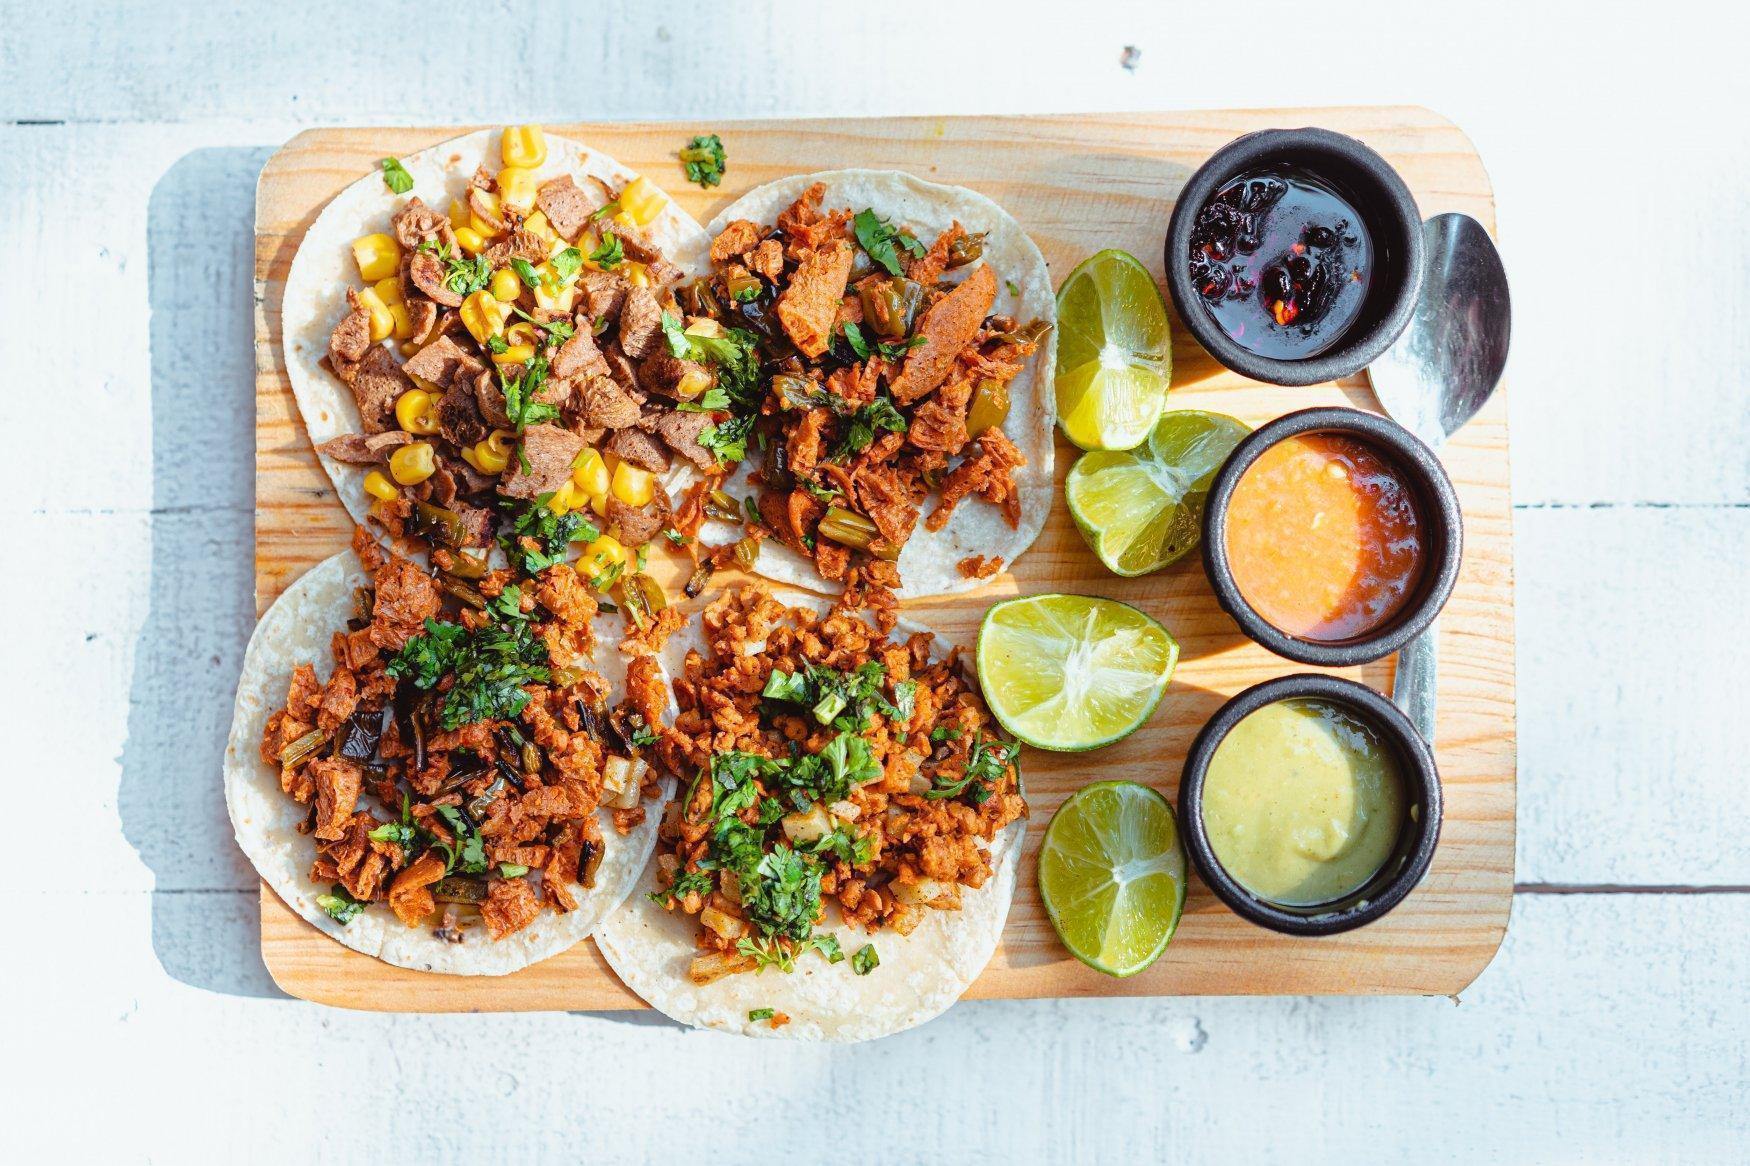 Where to Eat the Best Tacos in Montreal